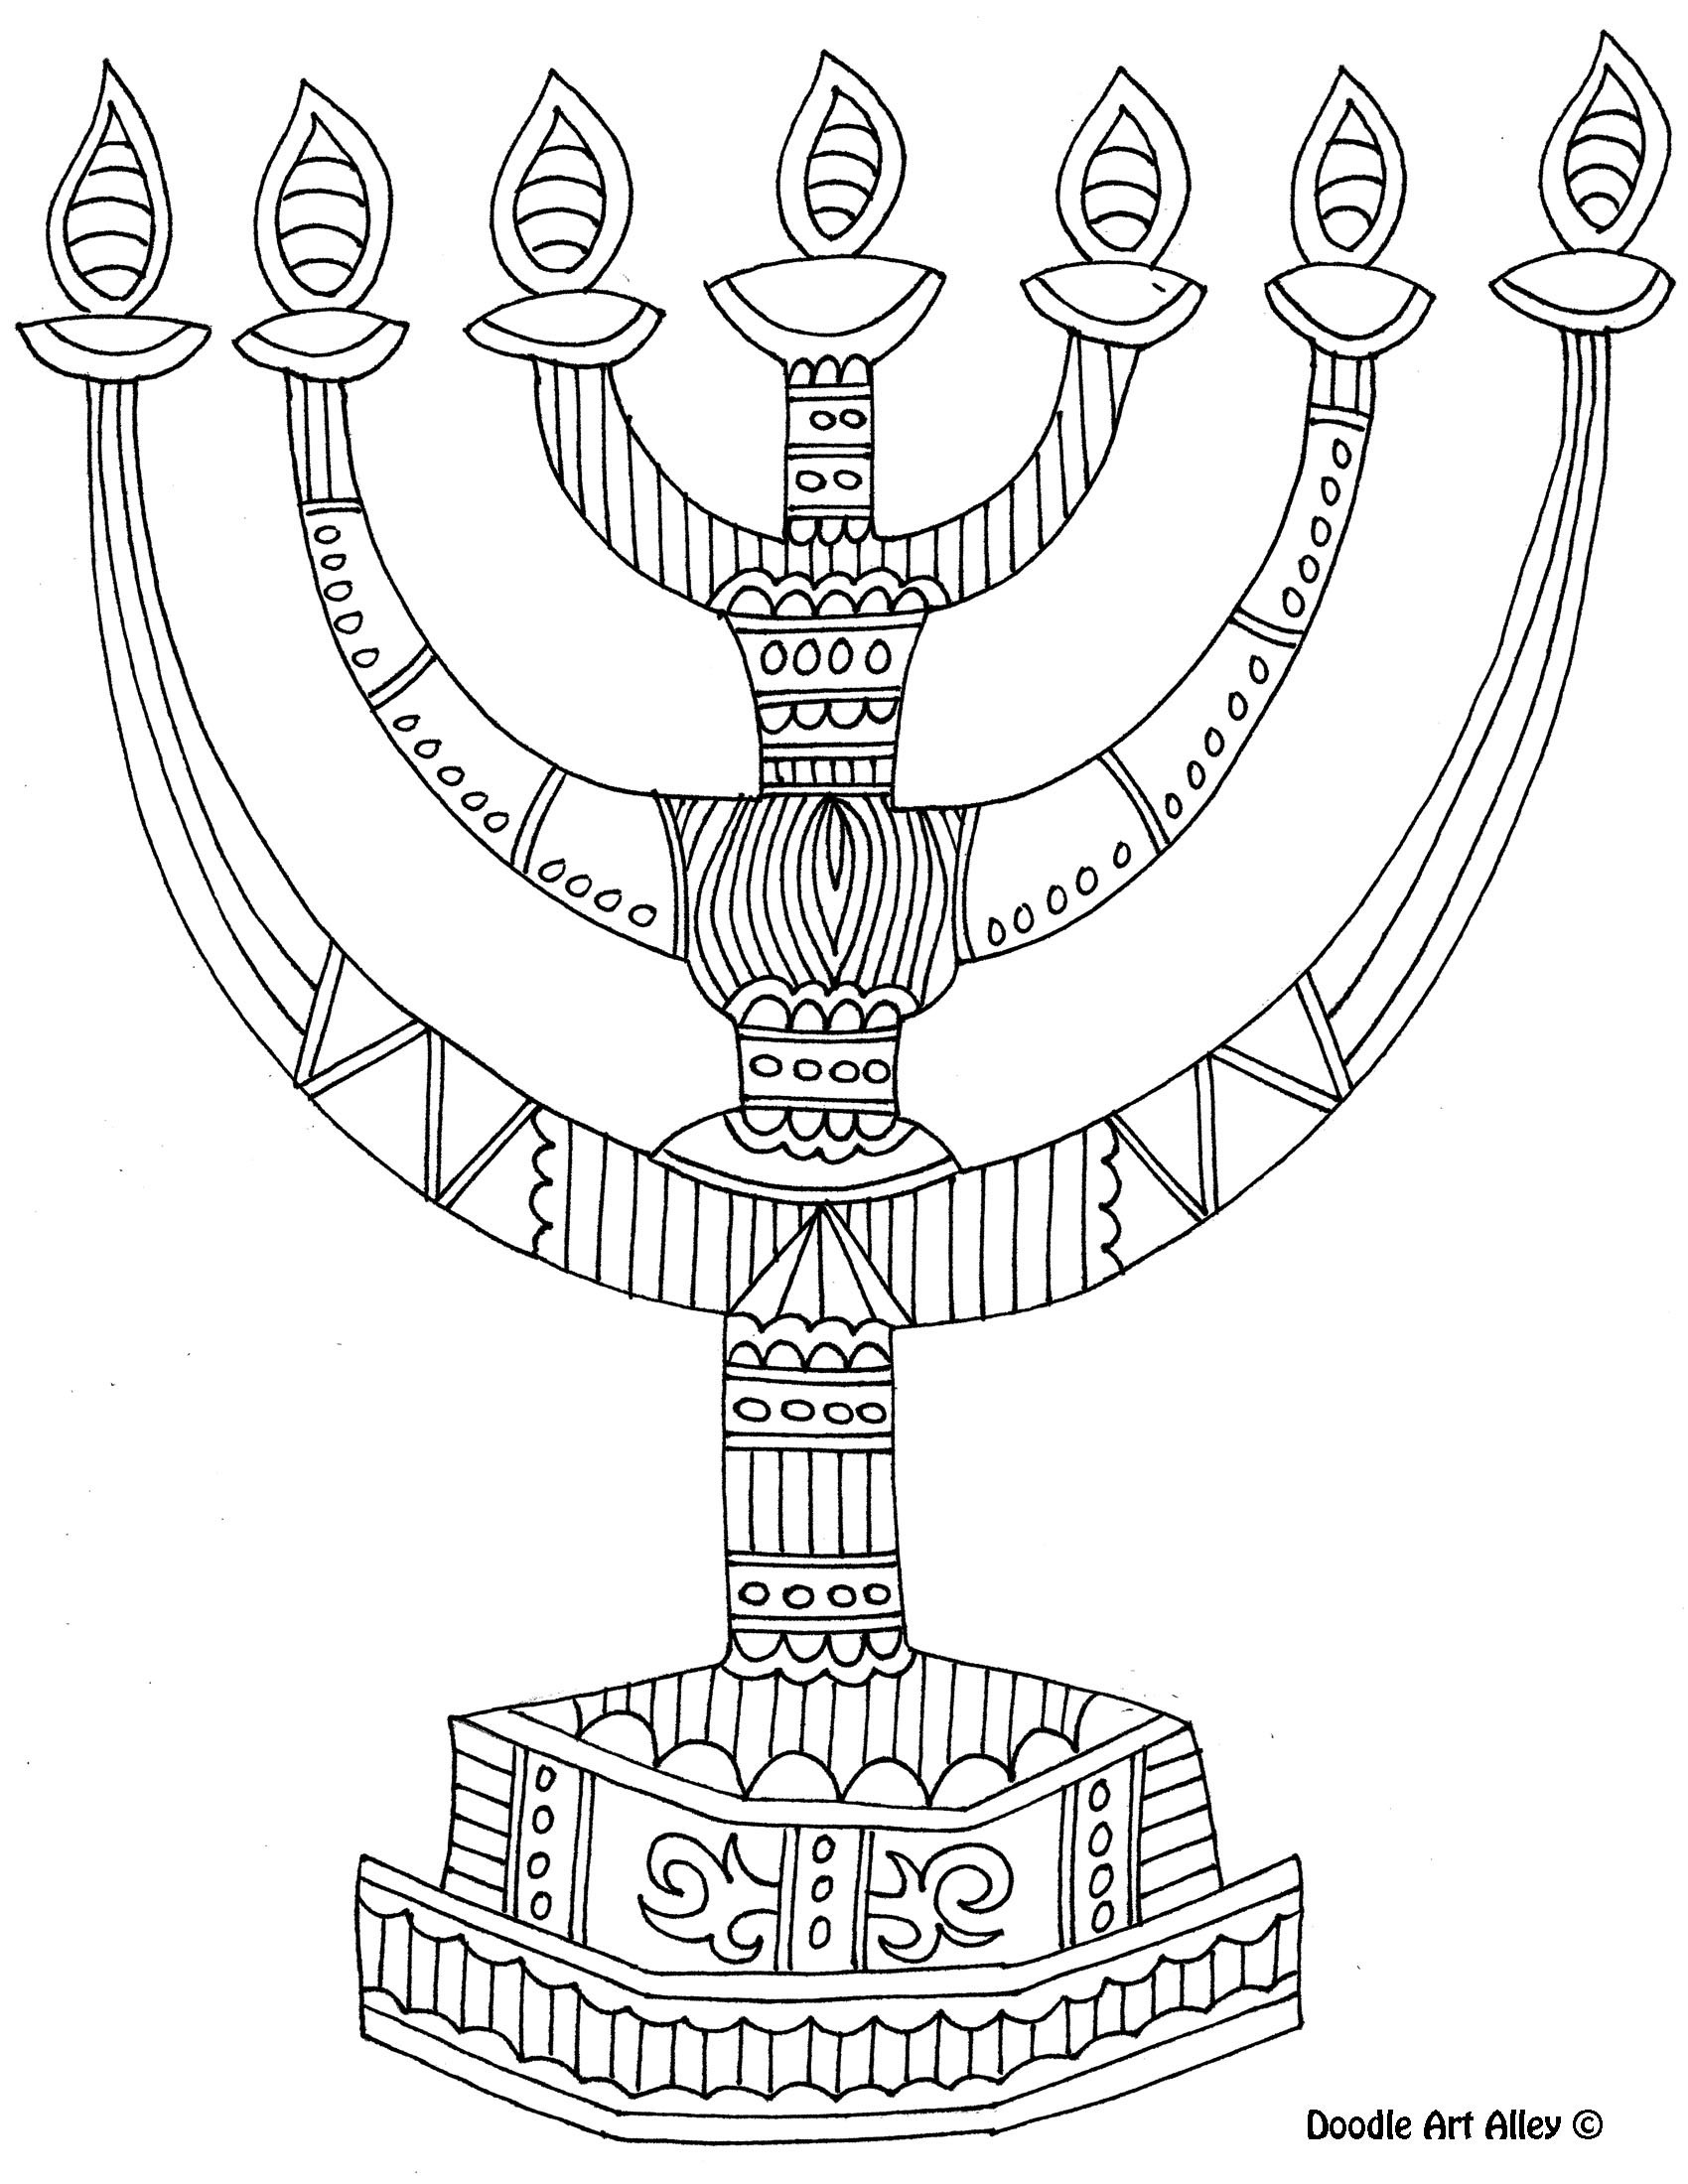 Hanukkah Coloring Pages Printable
 8 of the best most artful Hanukkah coloring pages